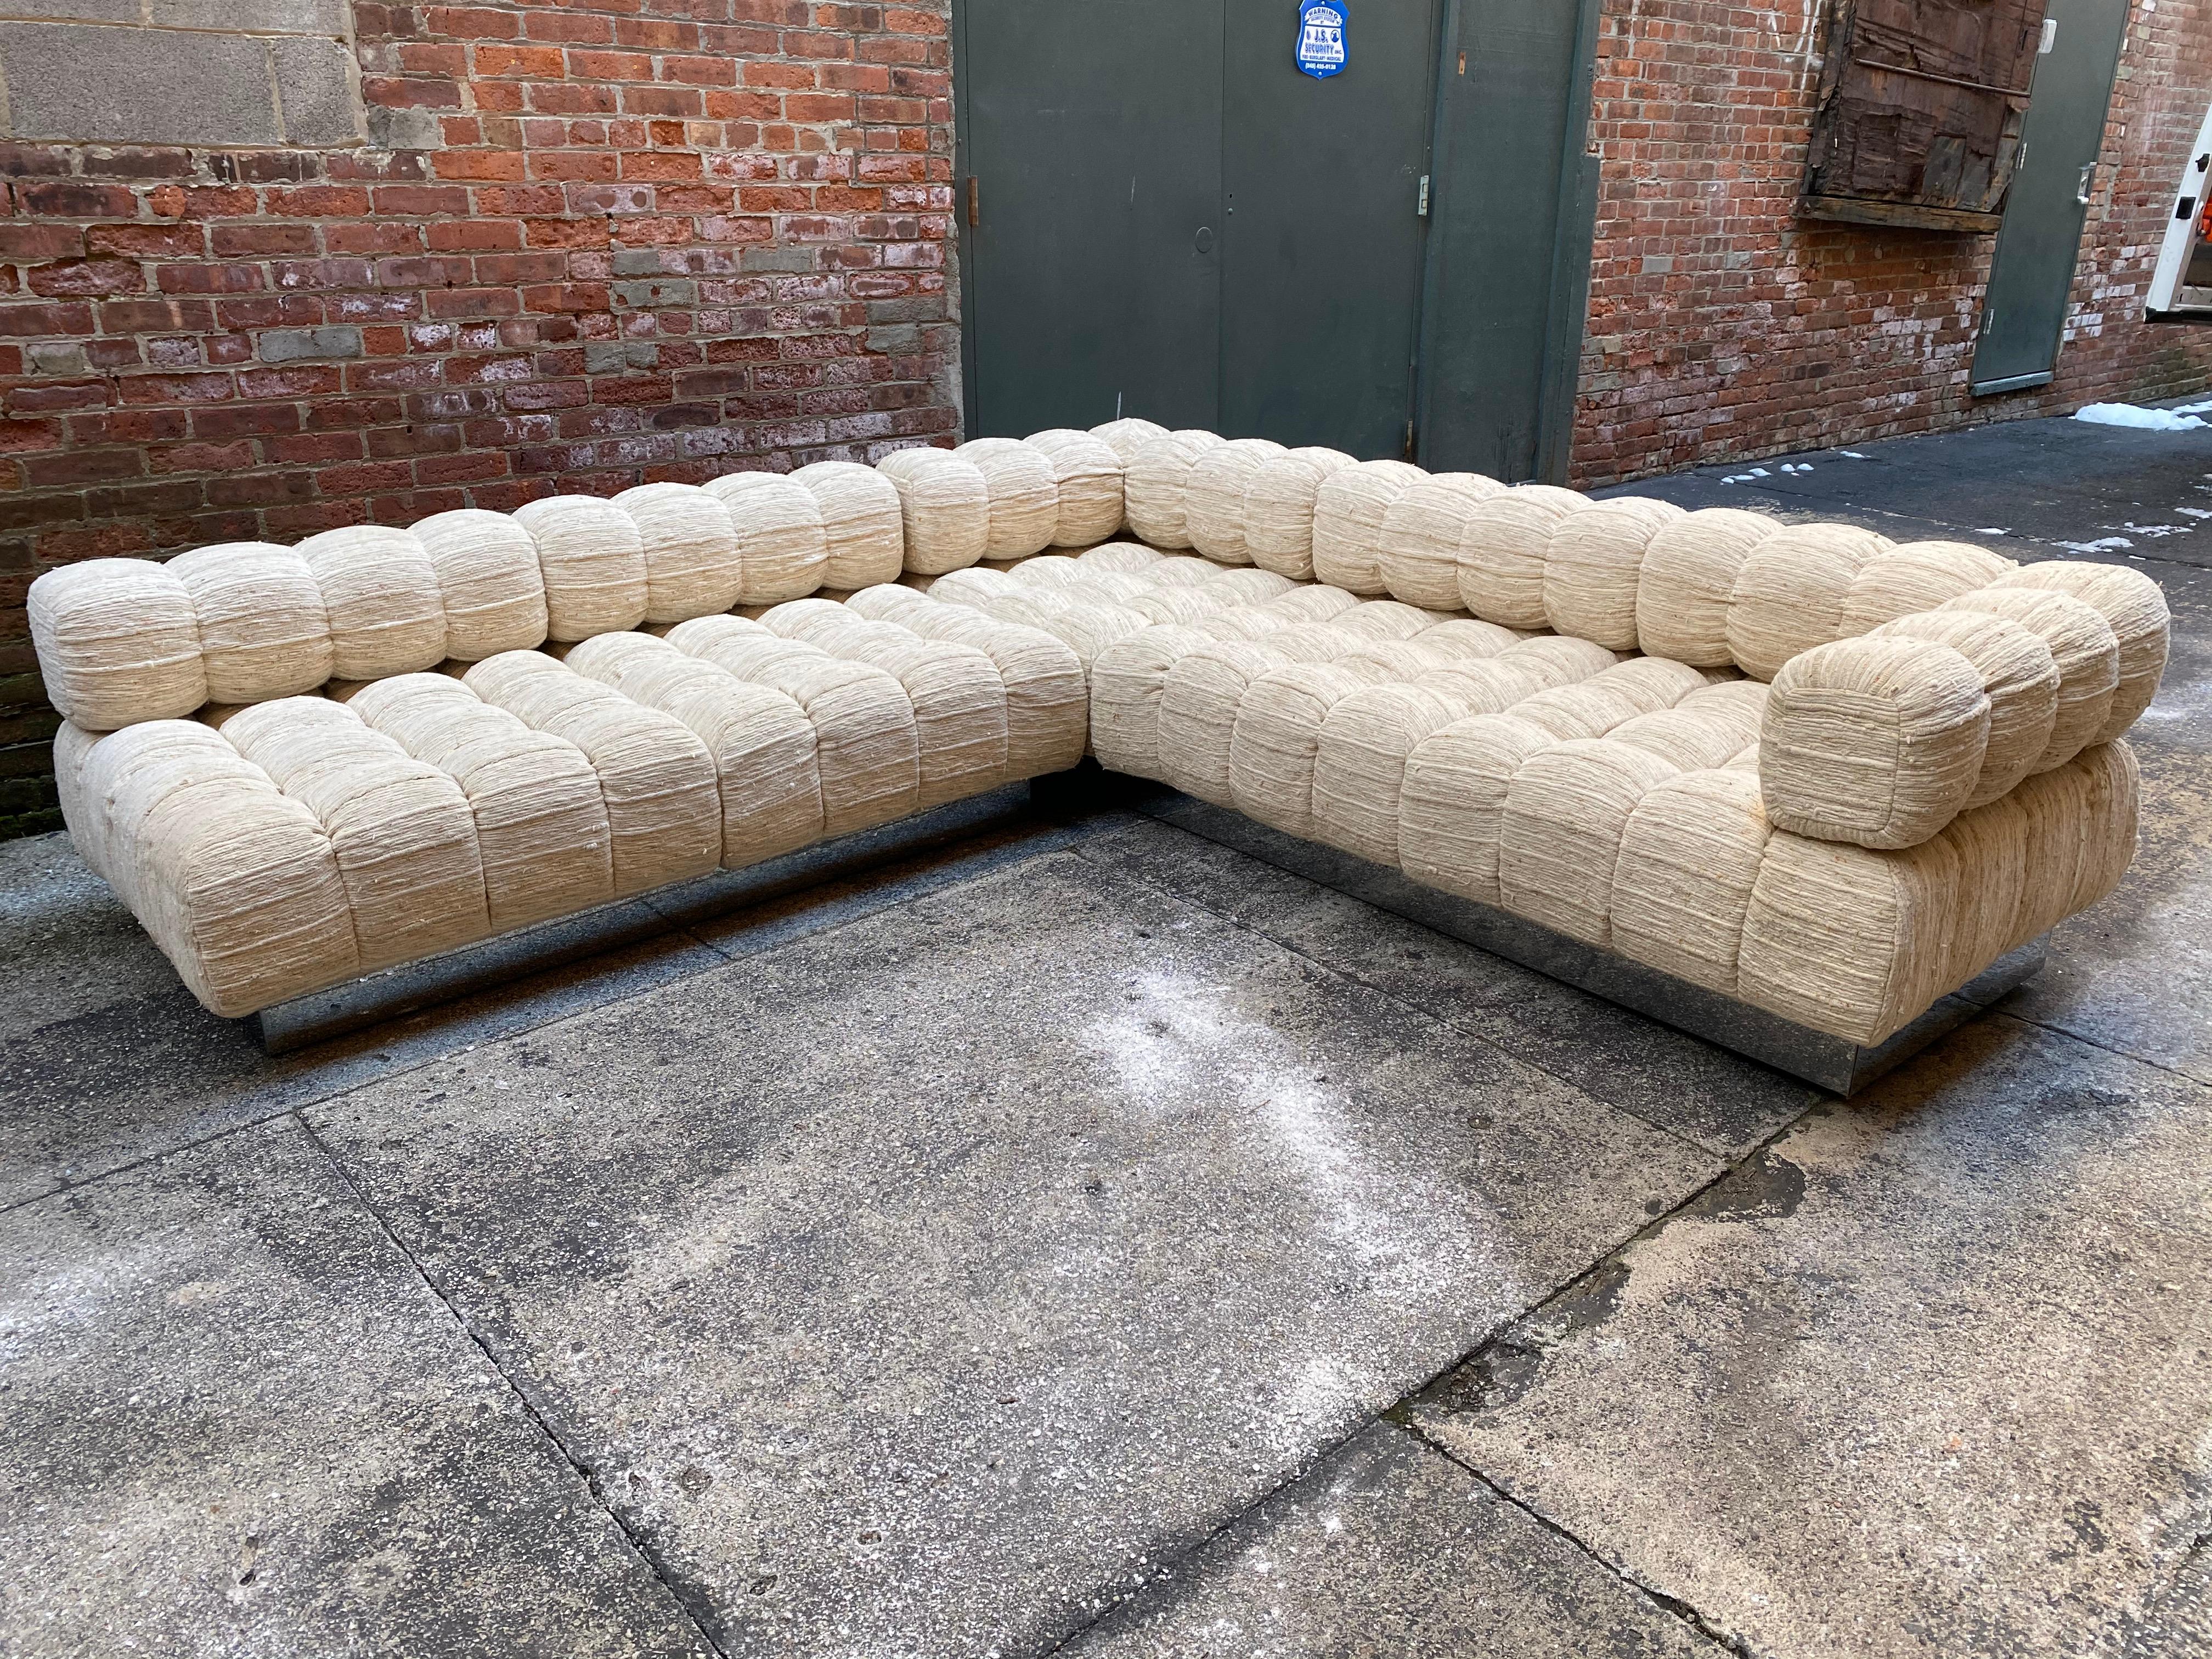 Two piece deep tuft sectional sofa designed by Harvey Probber. The two-piece features deep tuft cushions on a chrome plinth base. The original fabric is 